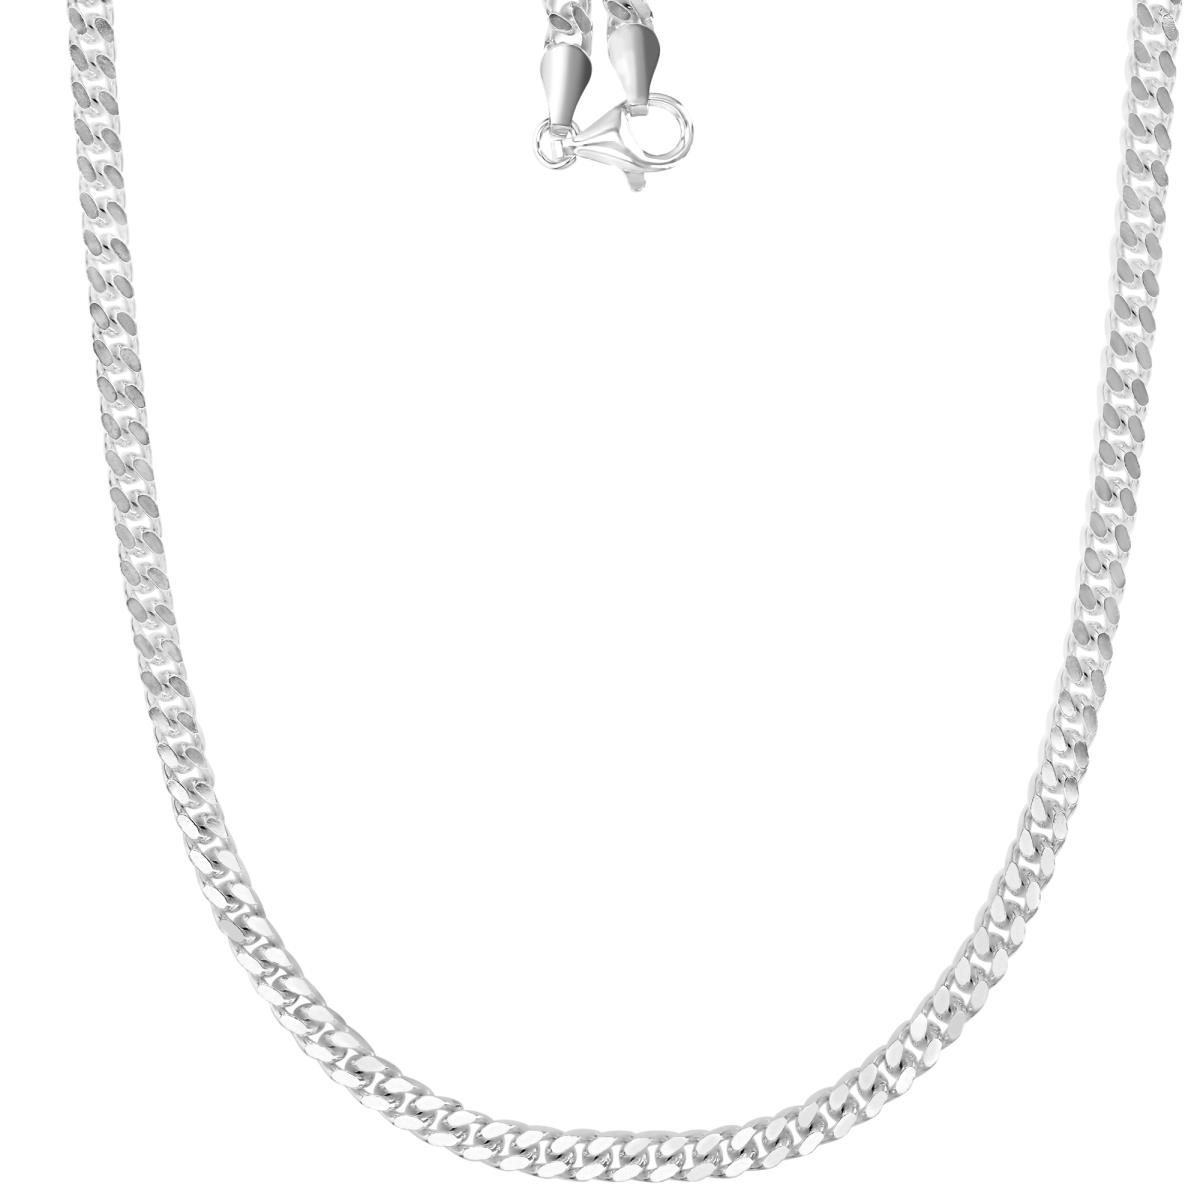 Sterling Silver Anti-Tarnish 3.5MM Polished & Diamond Cut 120 Curb 20" Chain Necklace